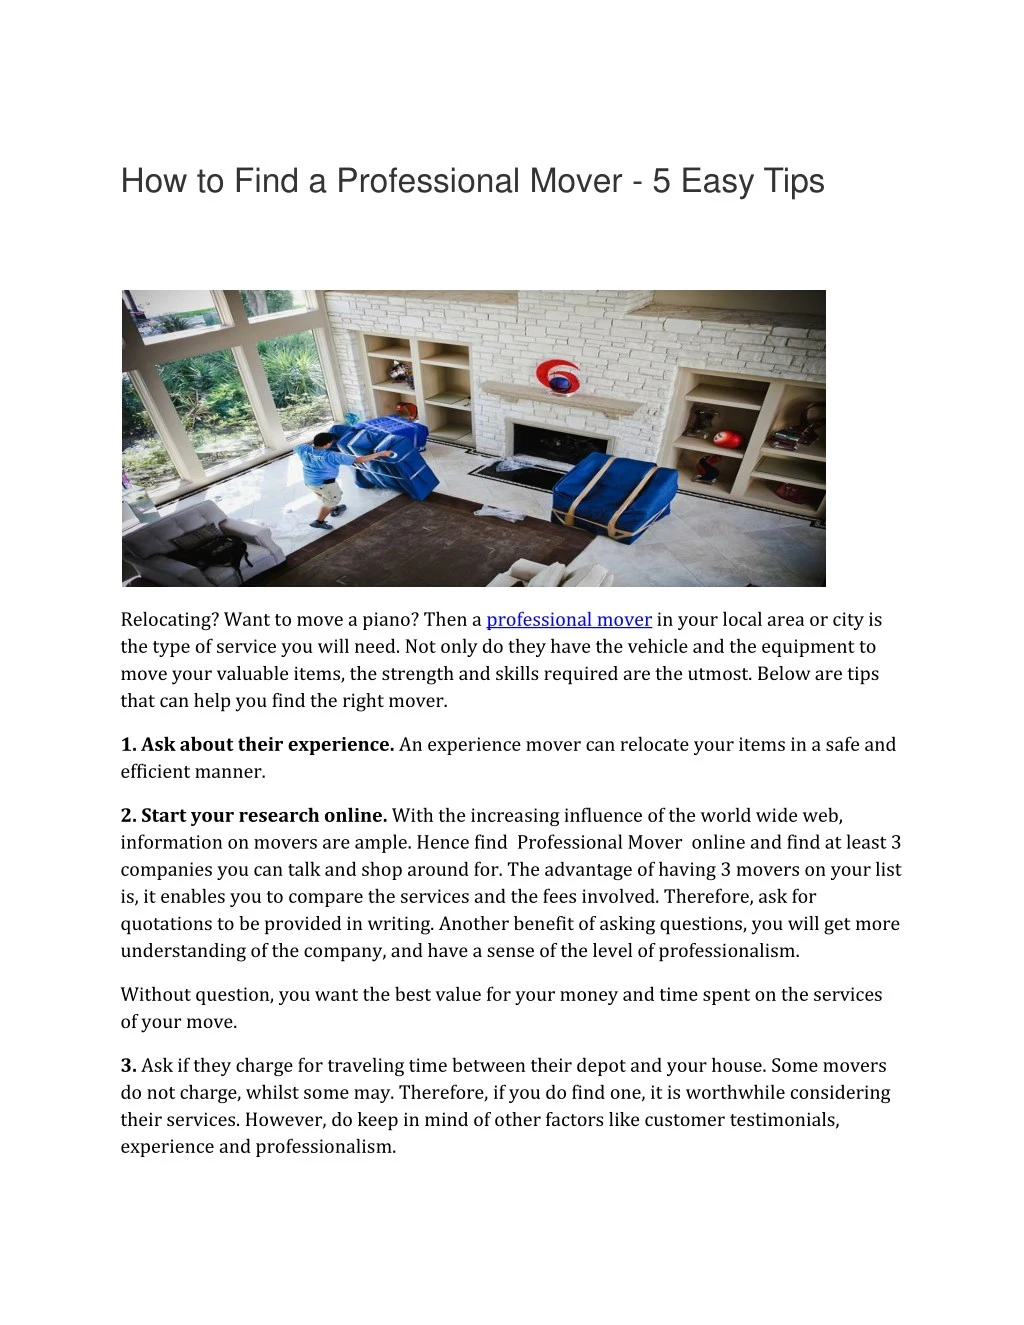 how to find a professional mover 5 easy tips